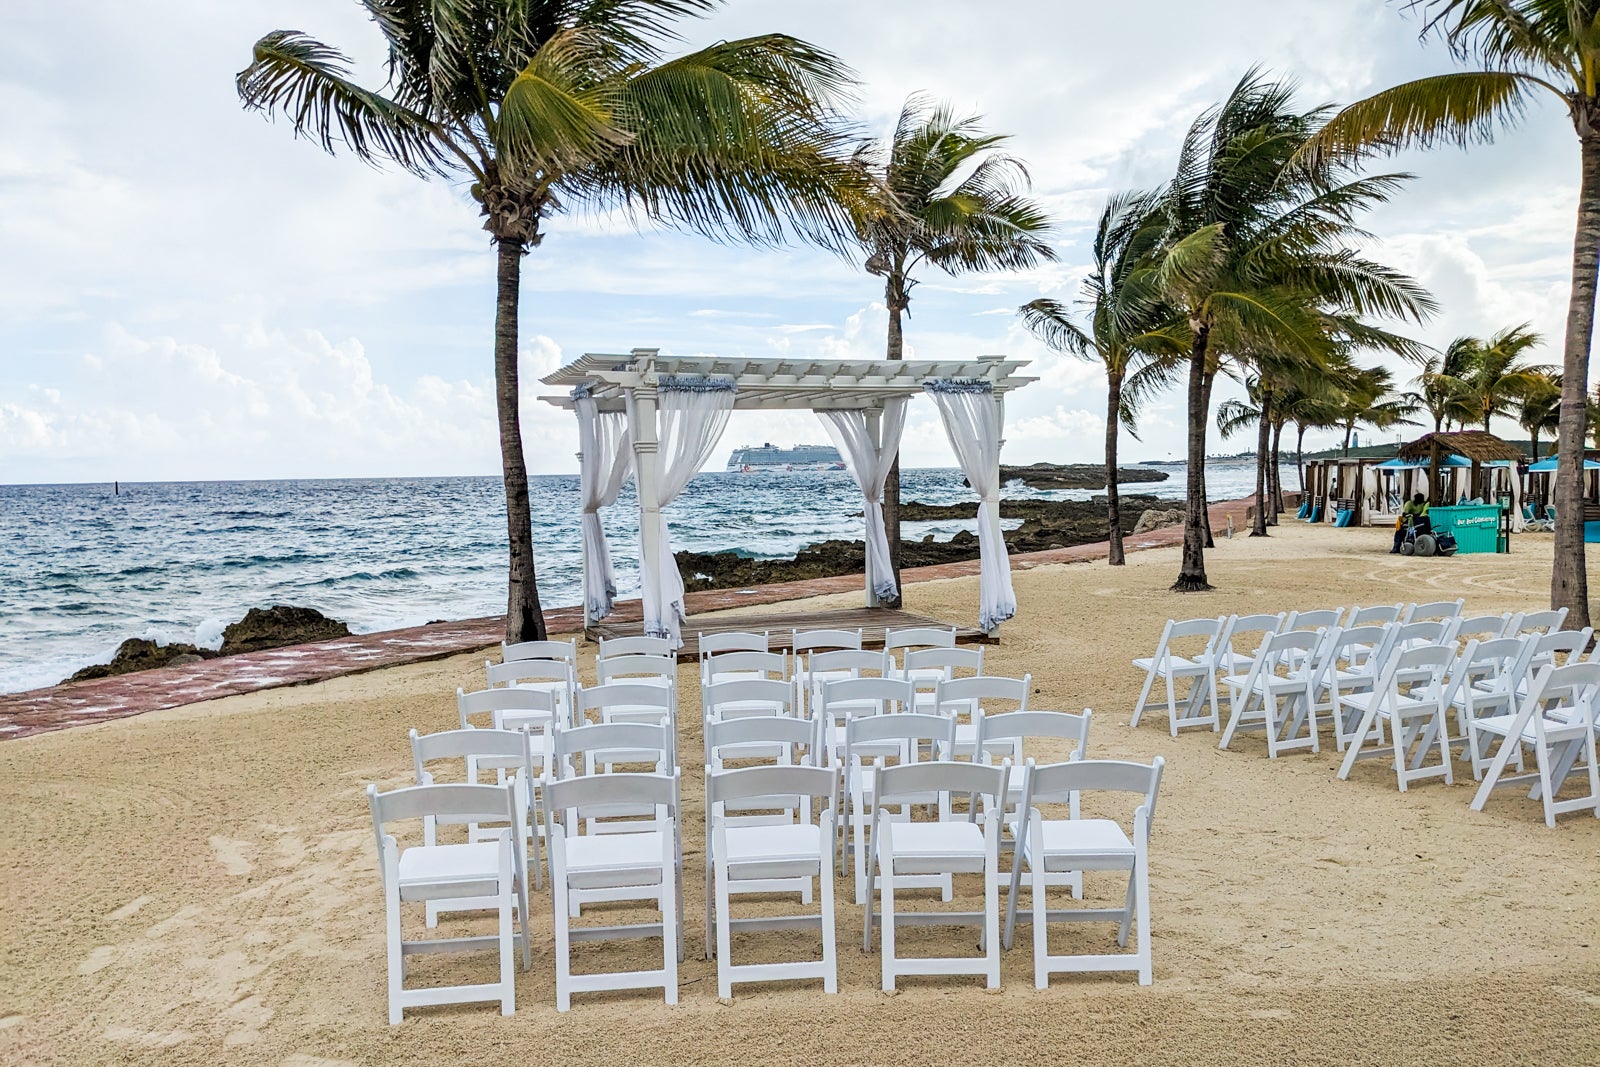 Beach wedding with white chairs, white draped canopy and palm trees